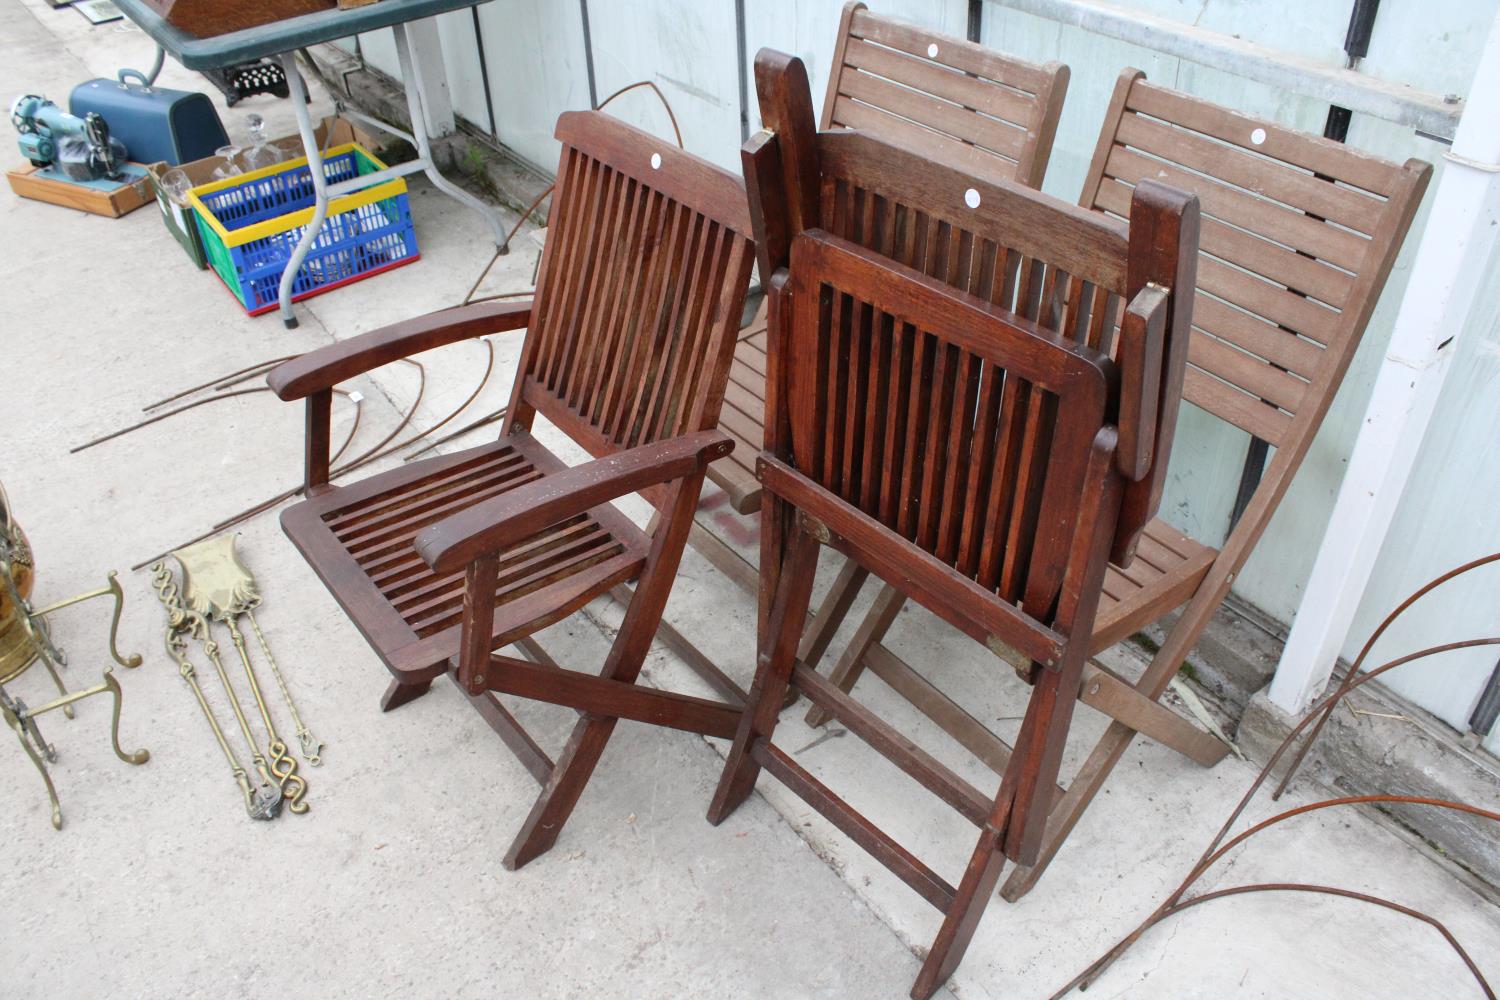 TWO PAIRS OF TEAK FOLDING CHAIRS AND A WOODEN SLATTED TABLE - Bild 3 aus 4